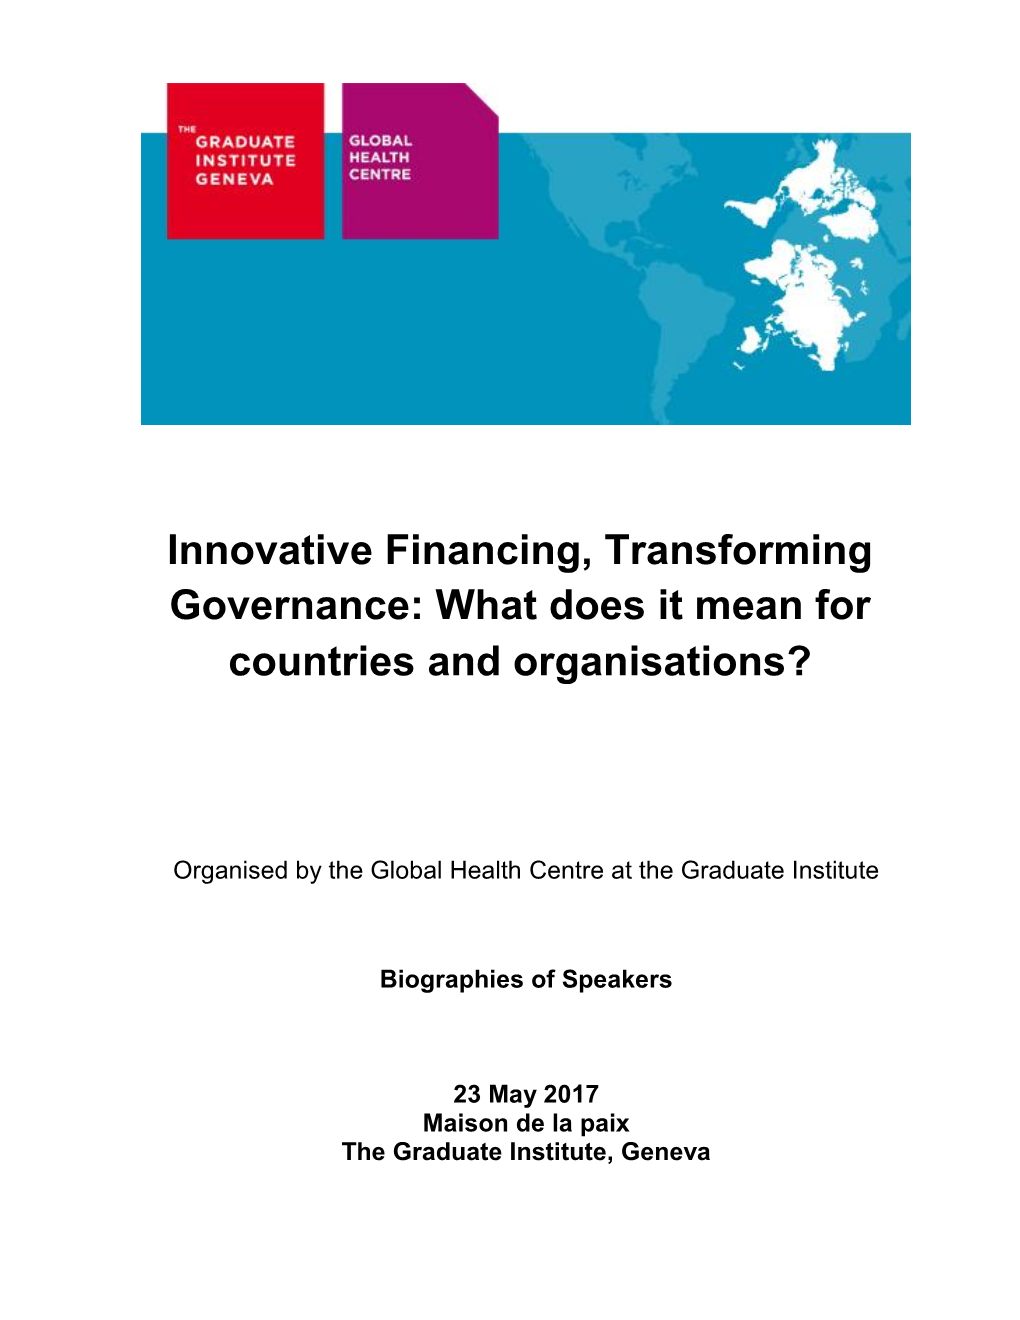 Innovative Financing, Transforming Governance: What Does It Mean For